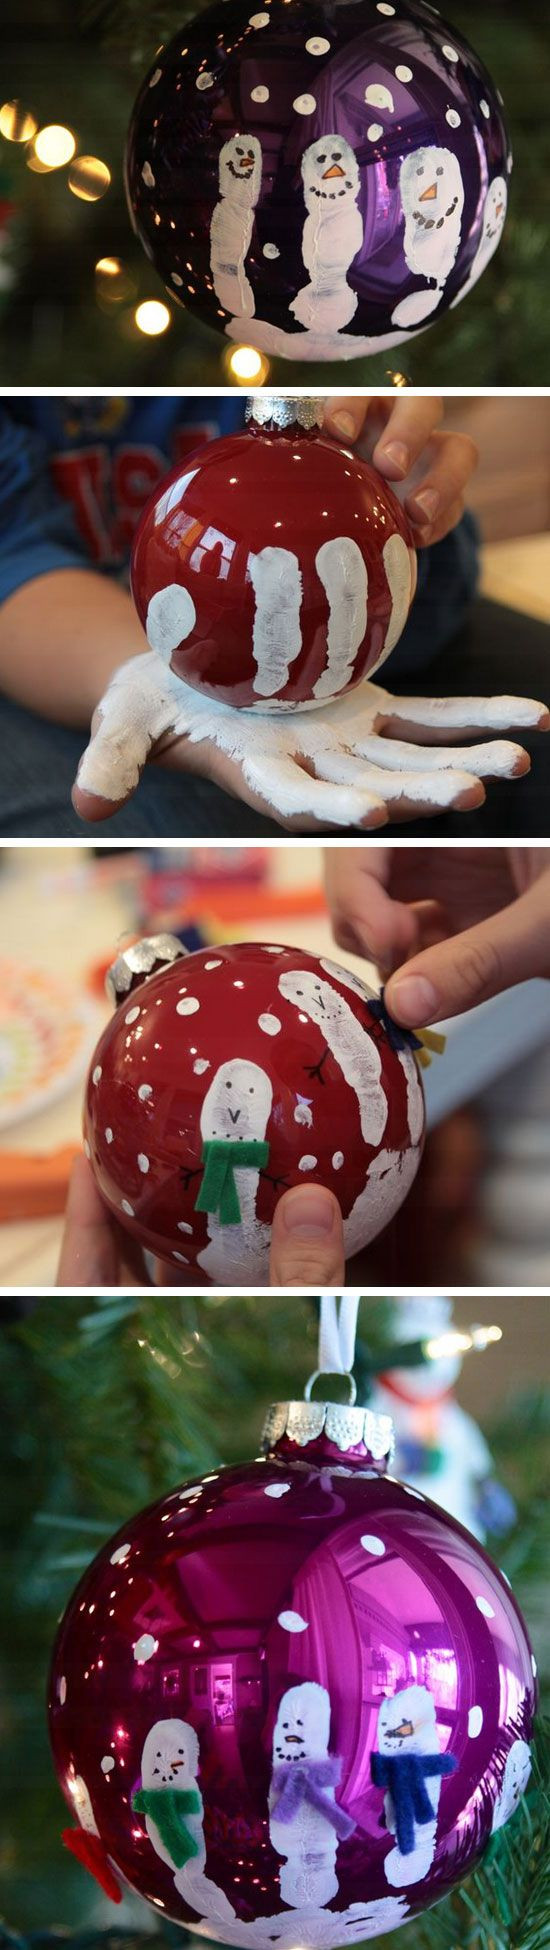 DIY Crafts For Toddlers
 Easy and Cute DIY Christmas Crafts for Kids to Make Hative